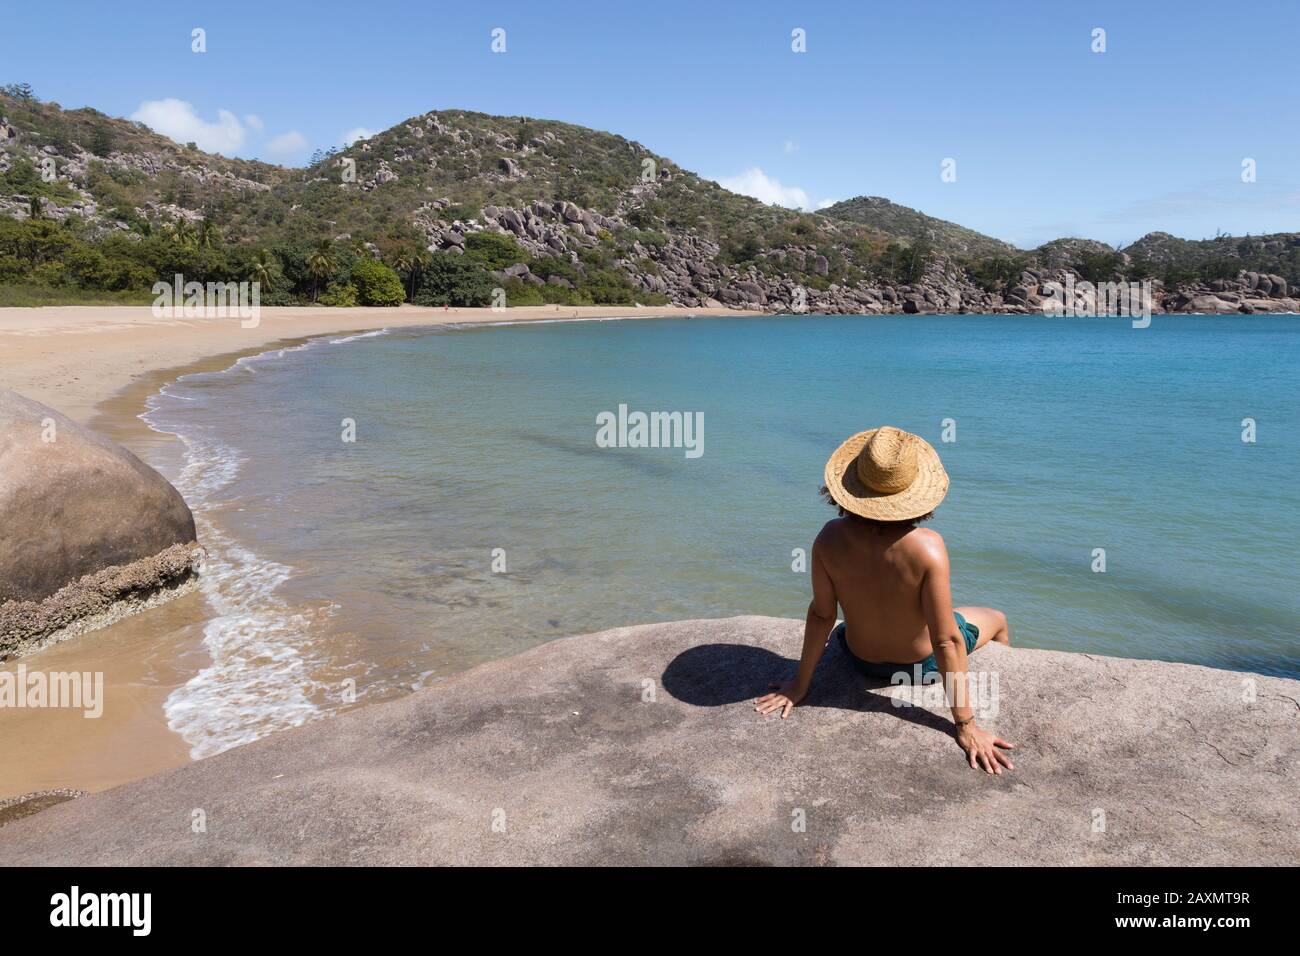 Curly hair man with hat and swimsuit, on top of rock, admiring the bay Stock Photo